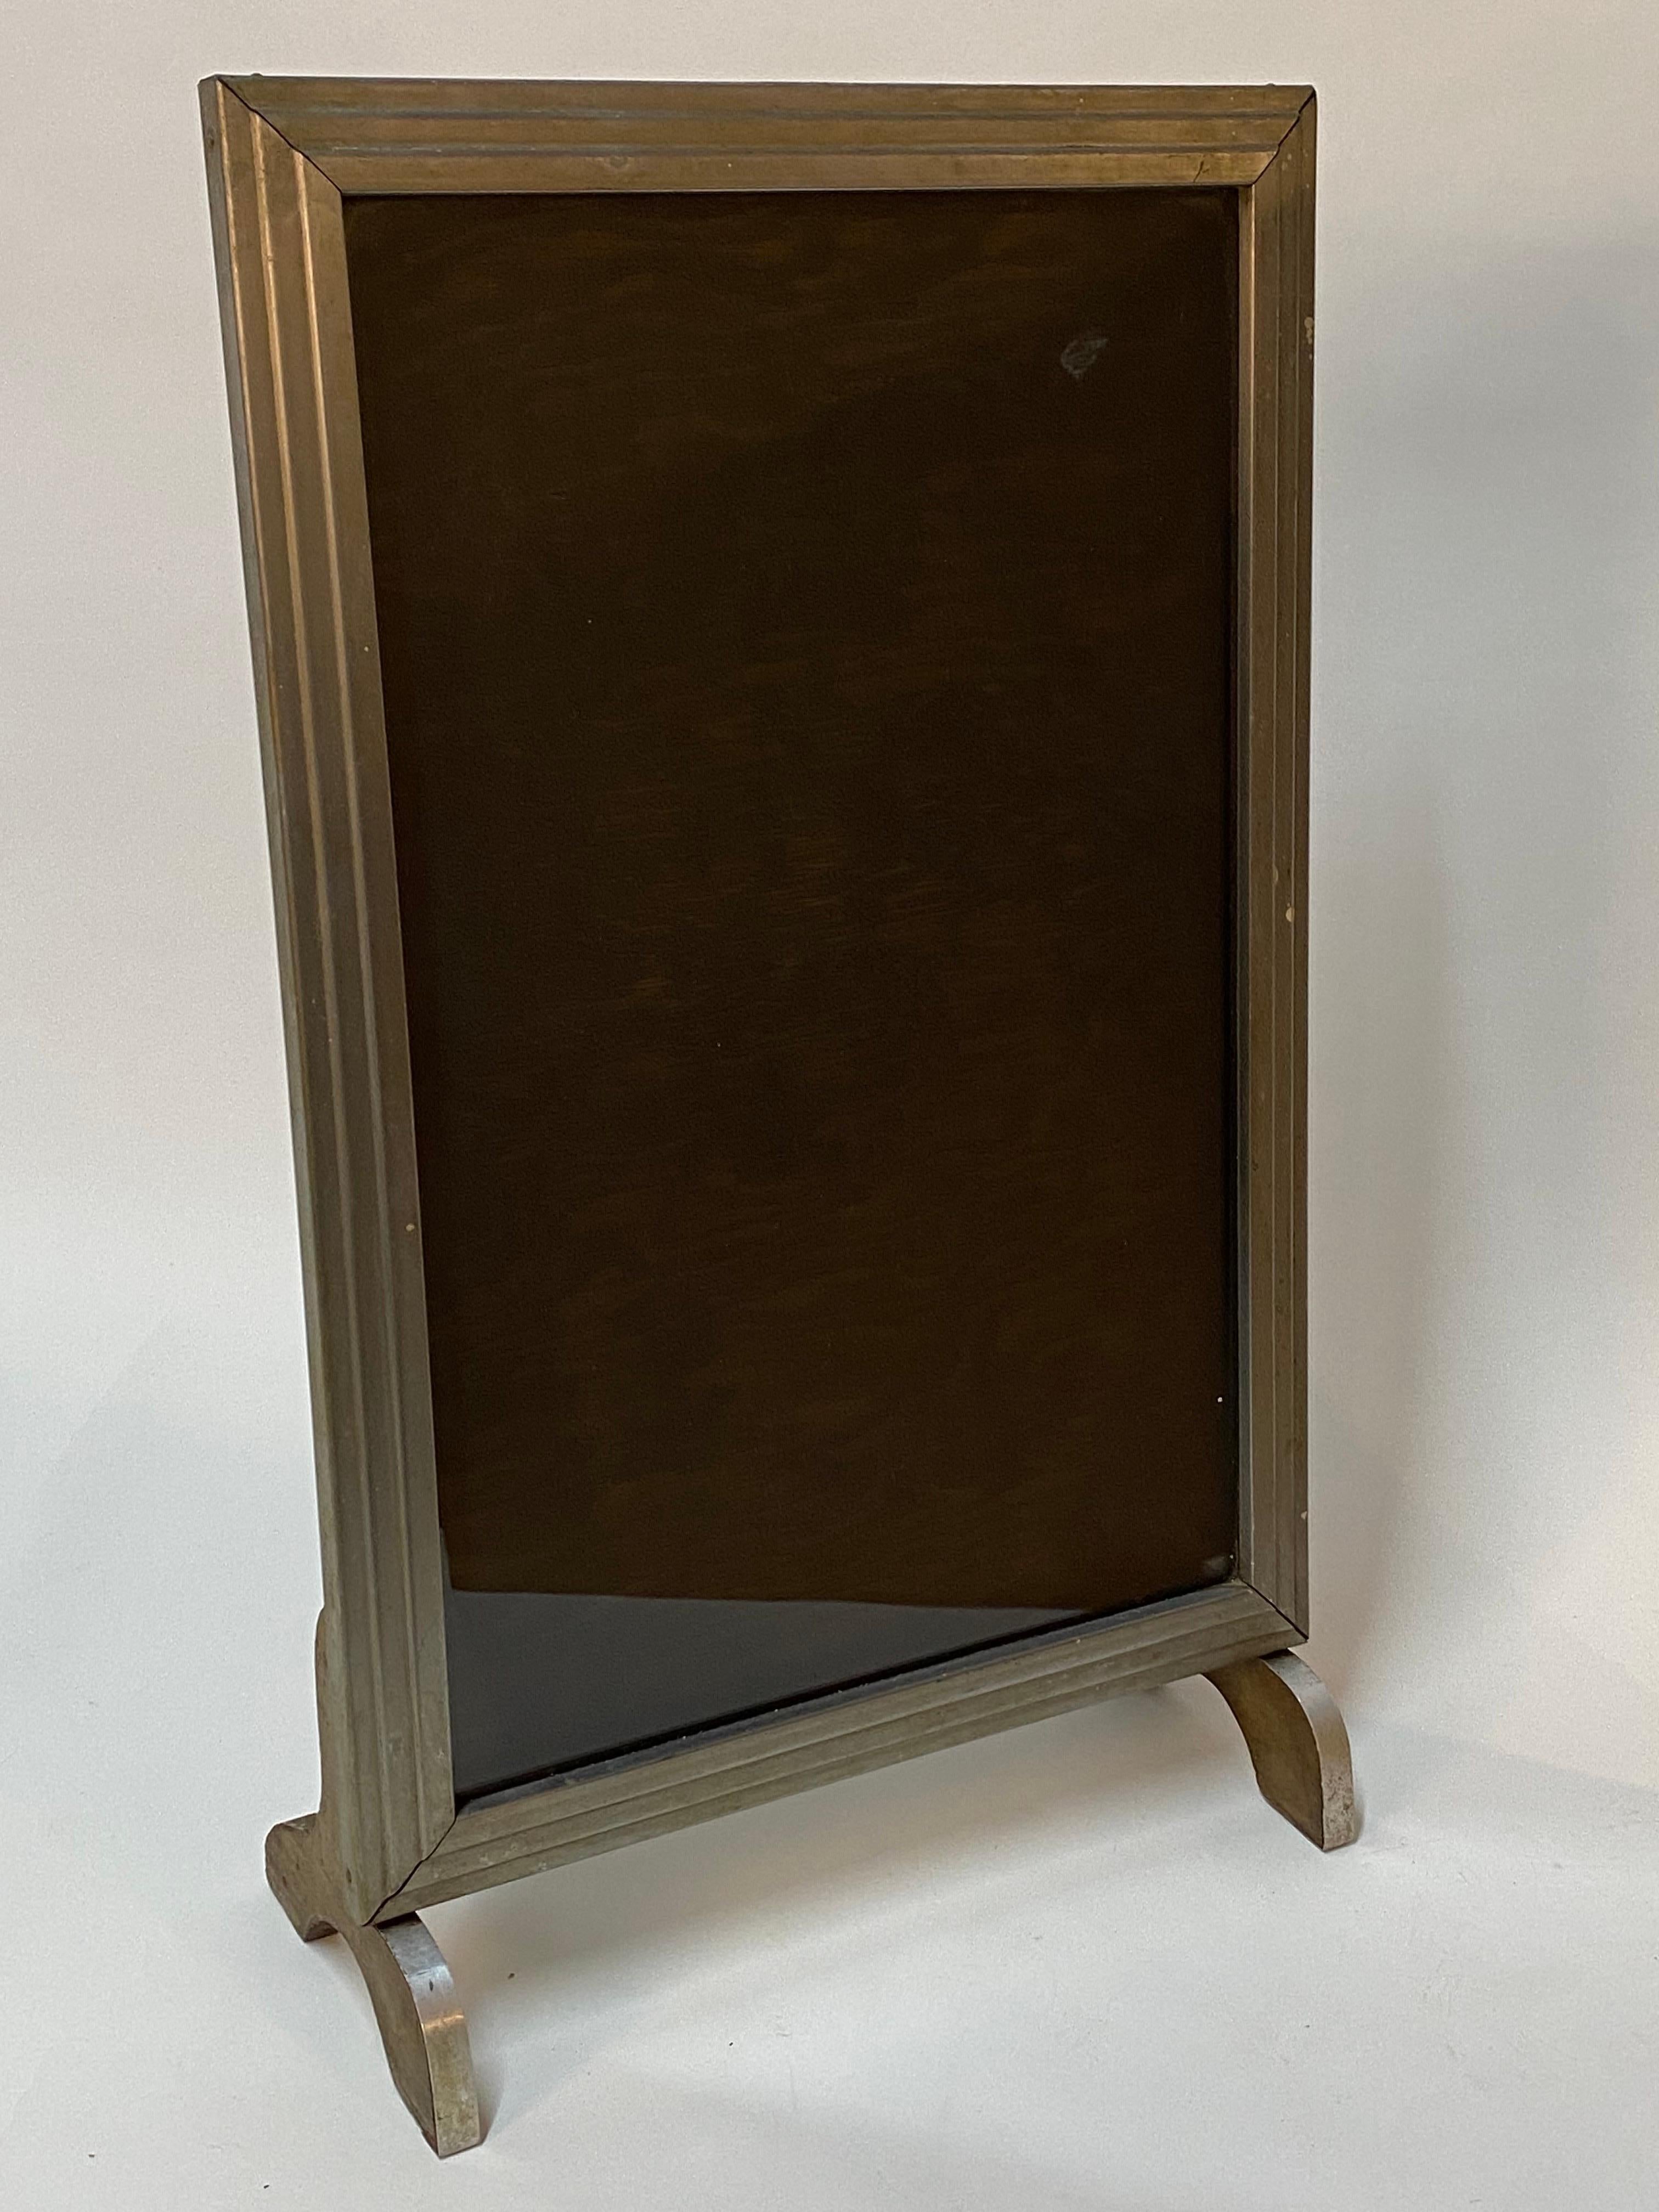 Exceptional stepped Art Deco nickel clad display frame. The nickel exterior covers the wood substrate and the fronts of the feet. The wood back is hinged and held in place with small flanges for ease of use and the graphics are under glass. Due to